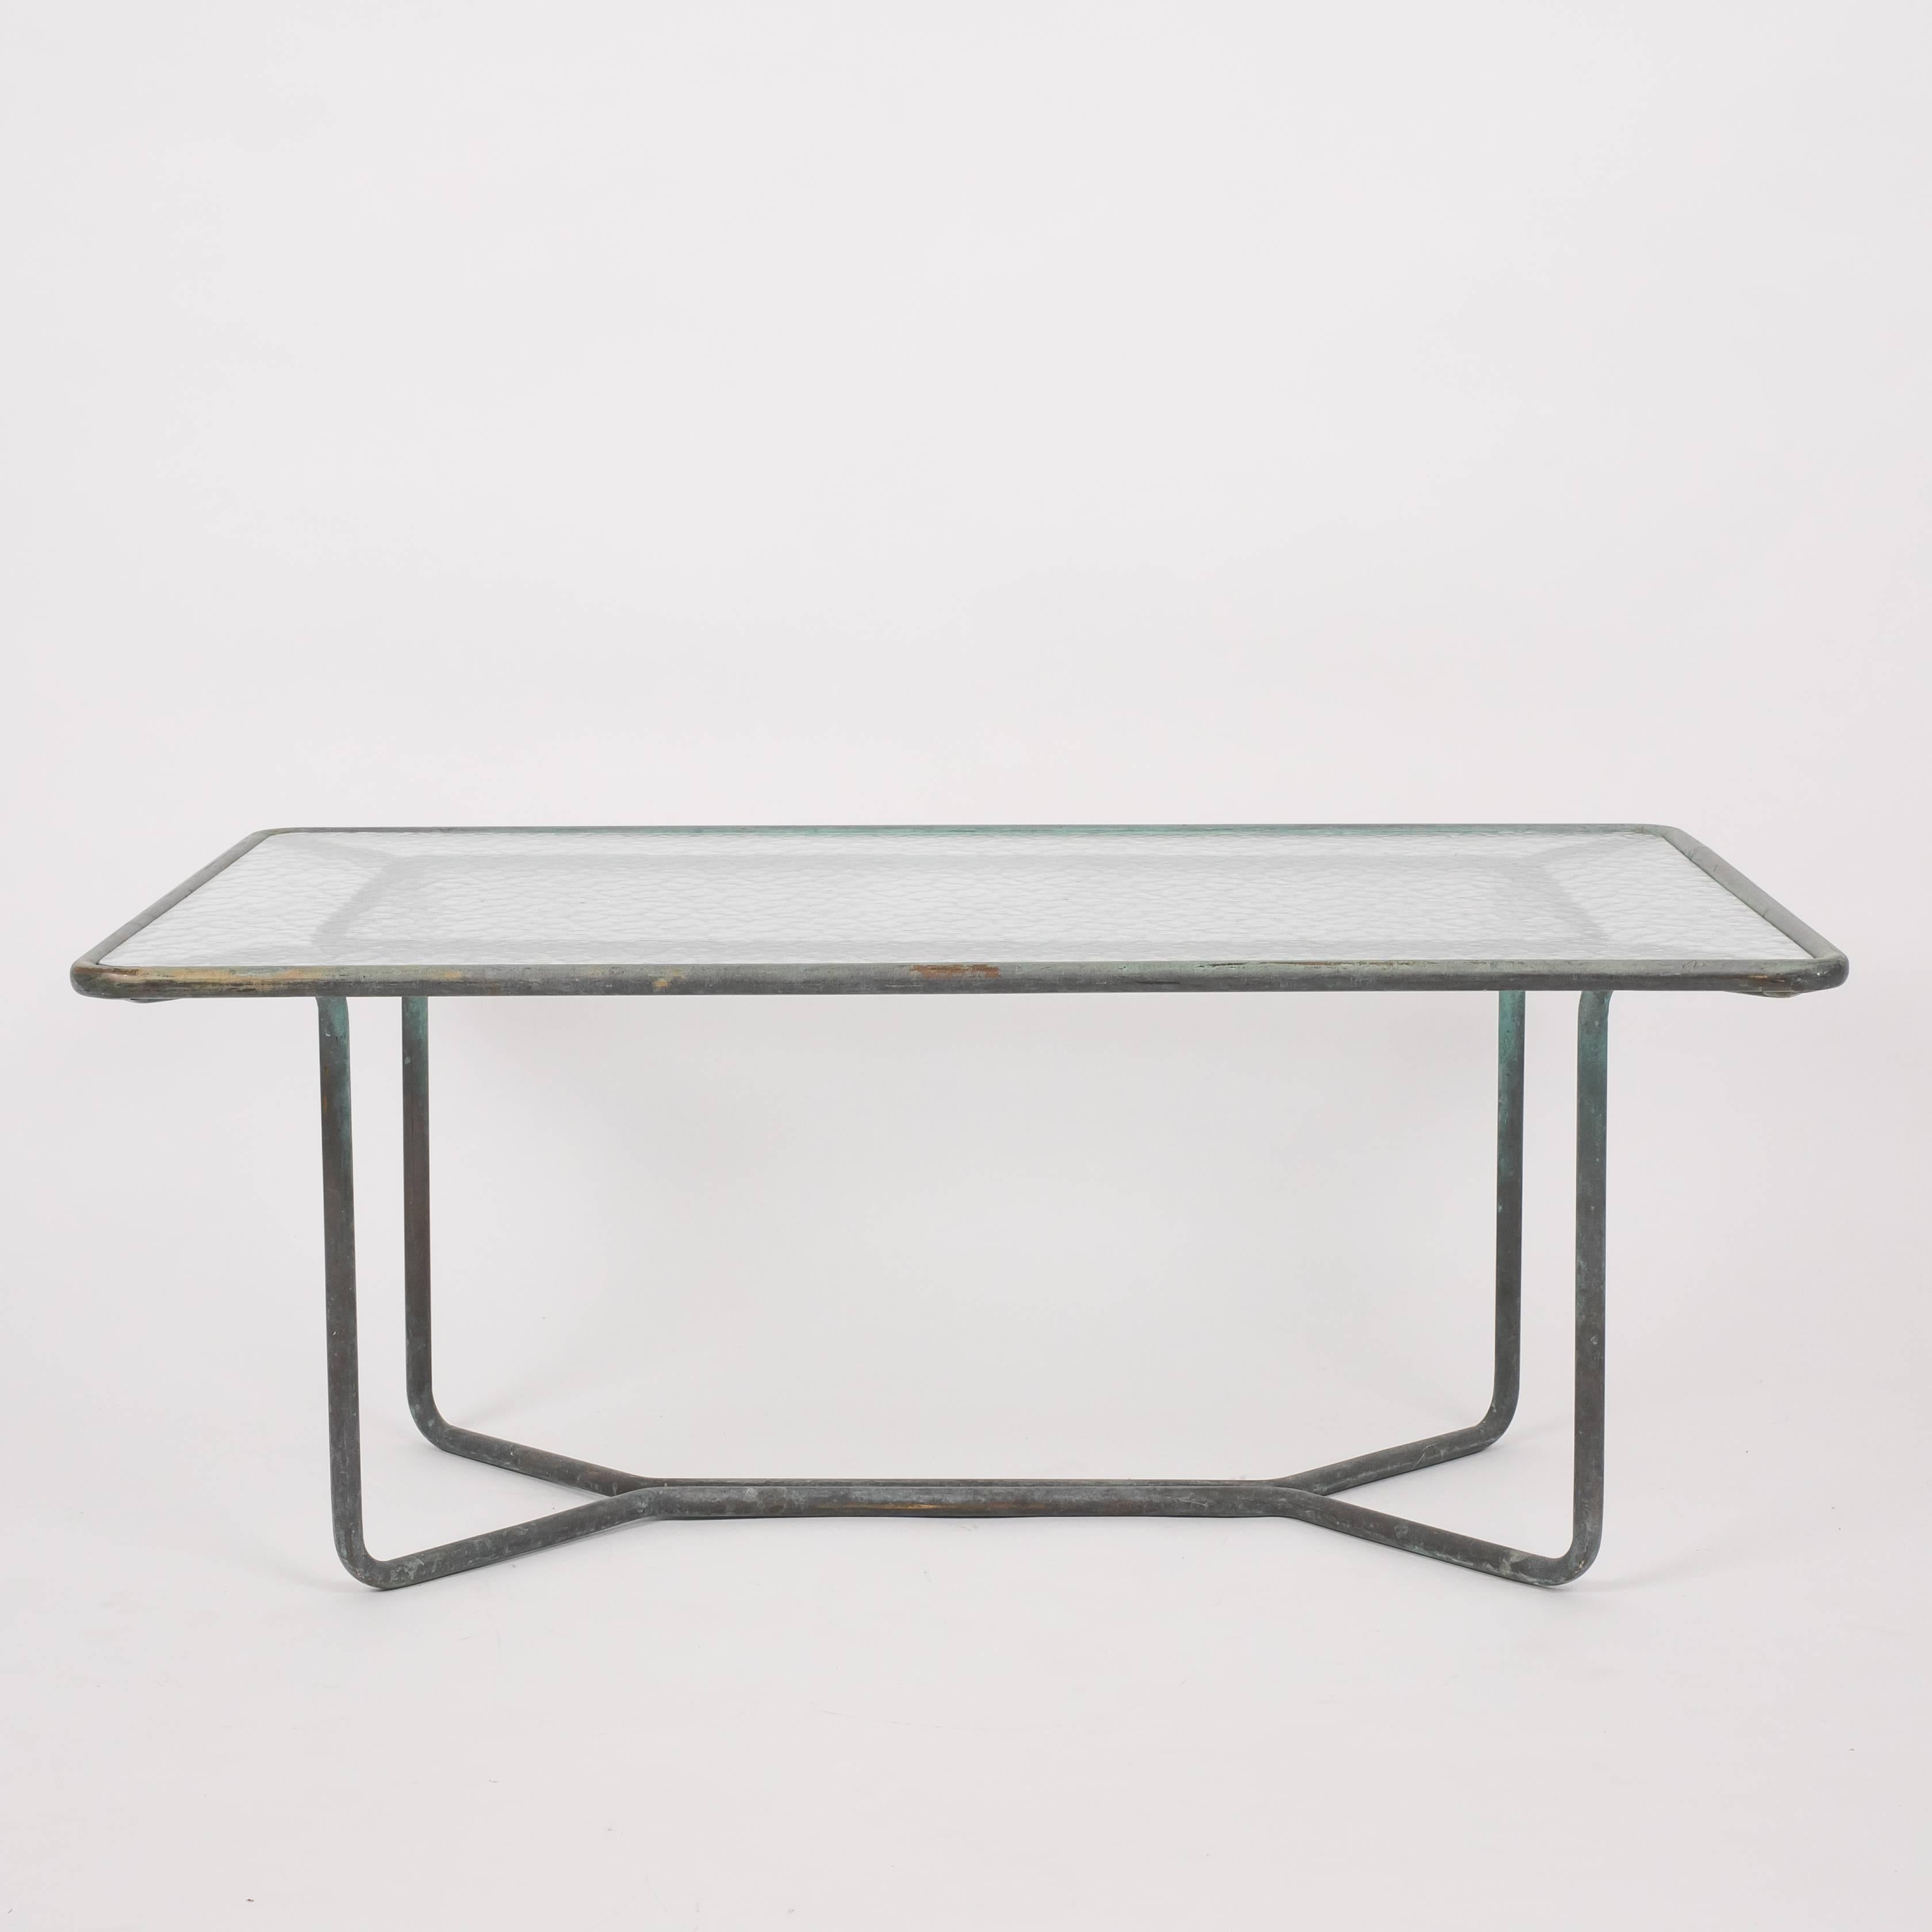 American Walter Lamb Rectangular Coffee Table with Hammered Glass Top